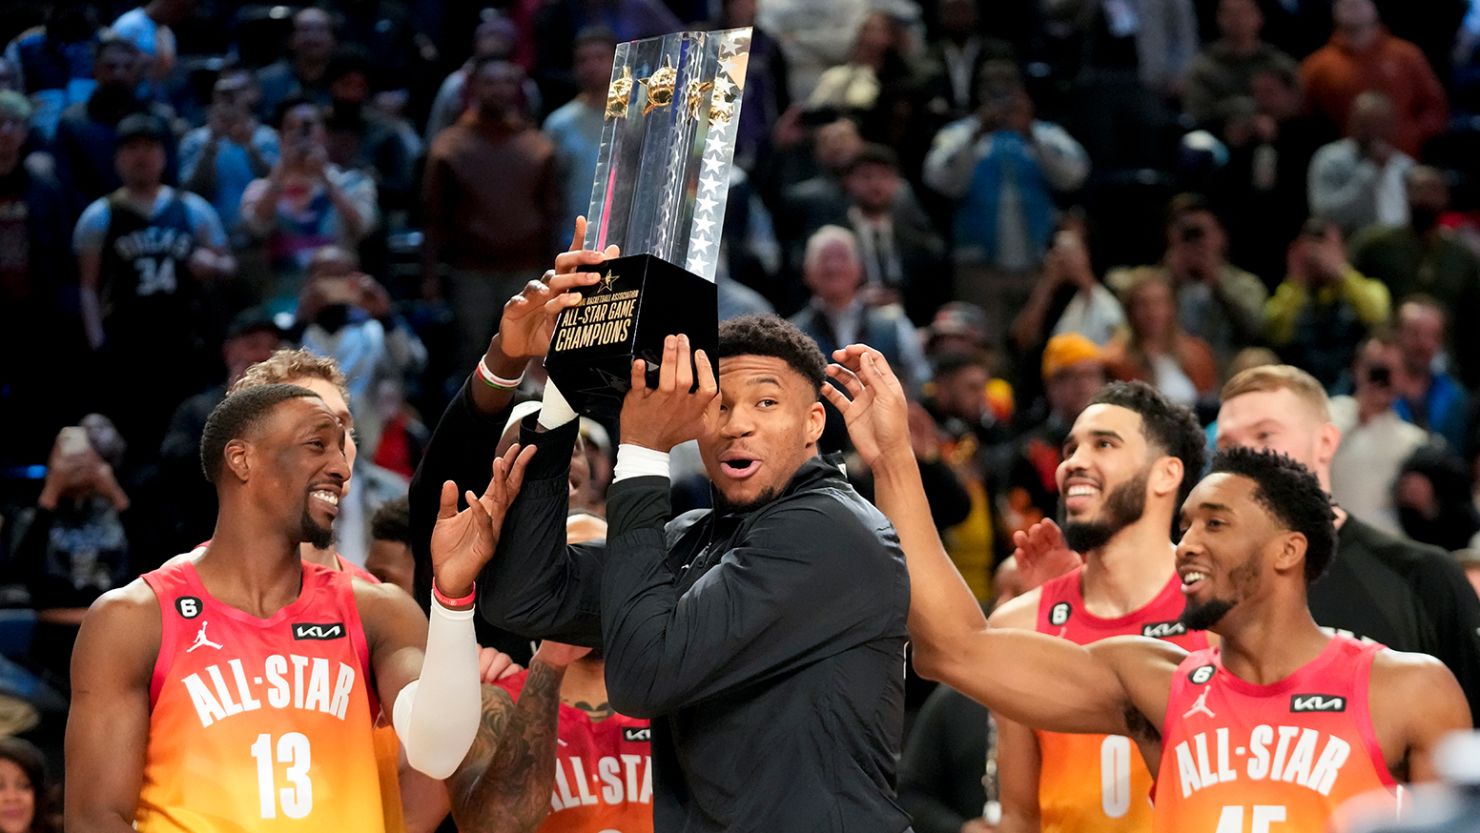 Team captain Giannis Antetokounmpo holds up the winning team trophy after the NBA All-Star game on Sunday night